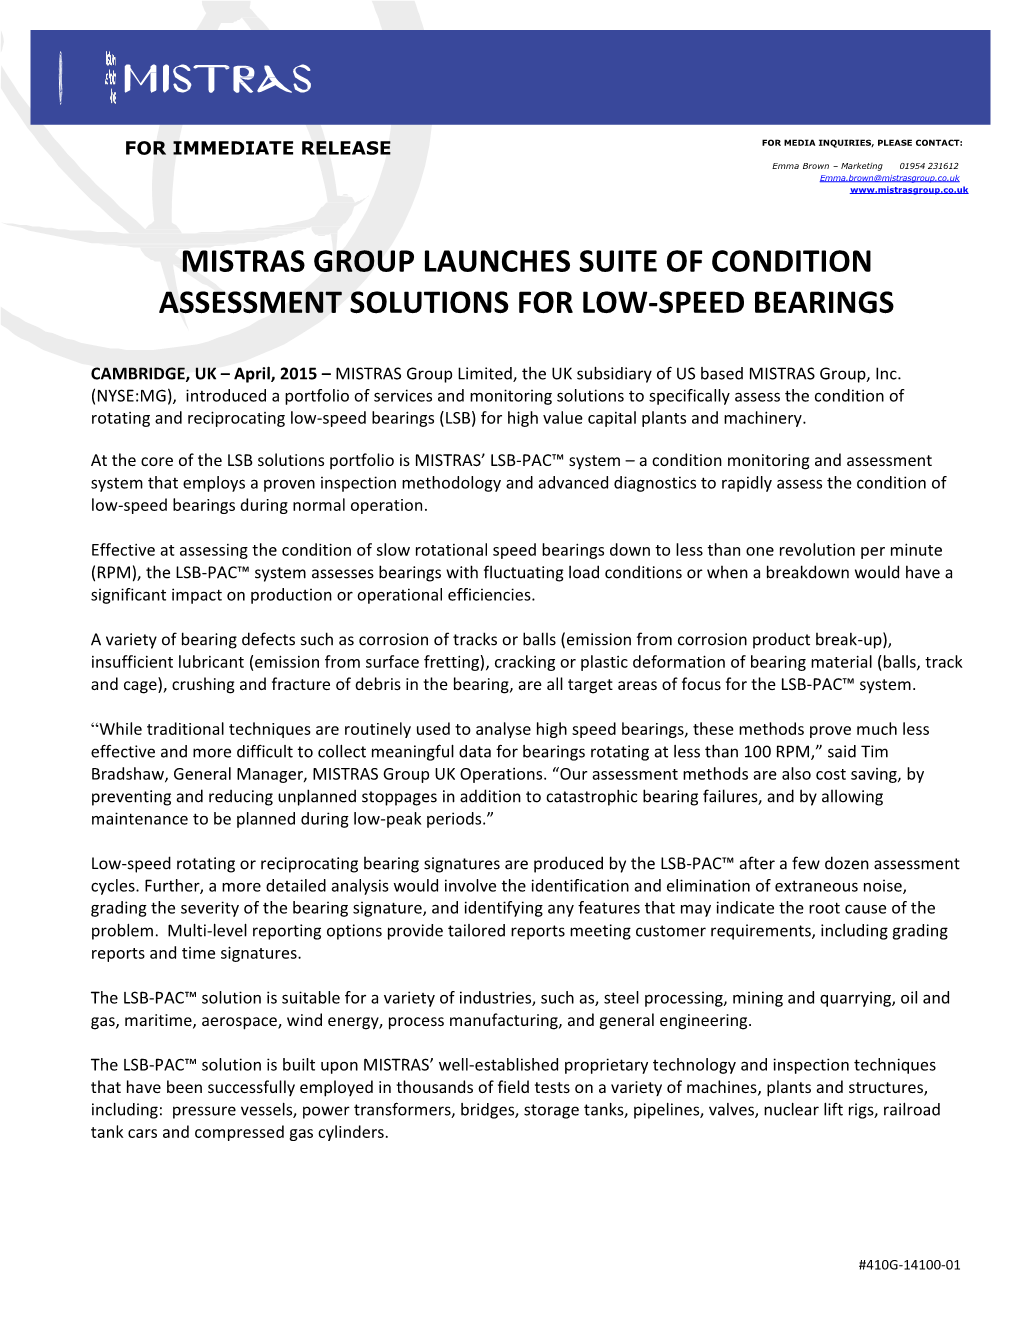 Mistras Group Launches Suite of Condition